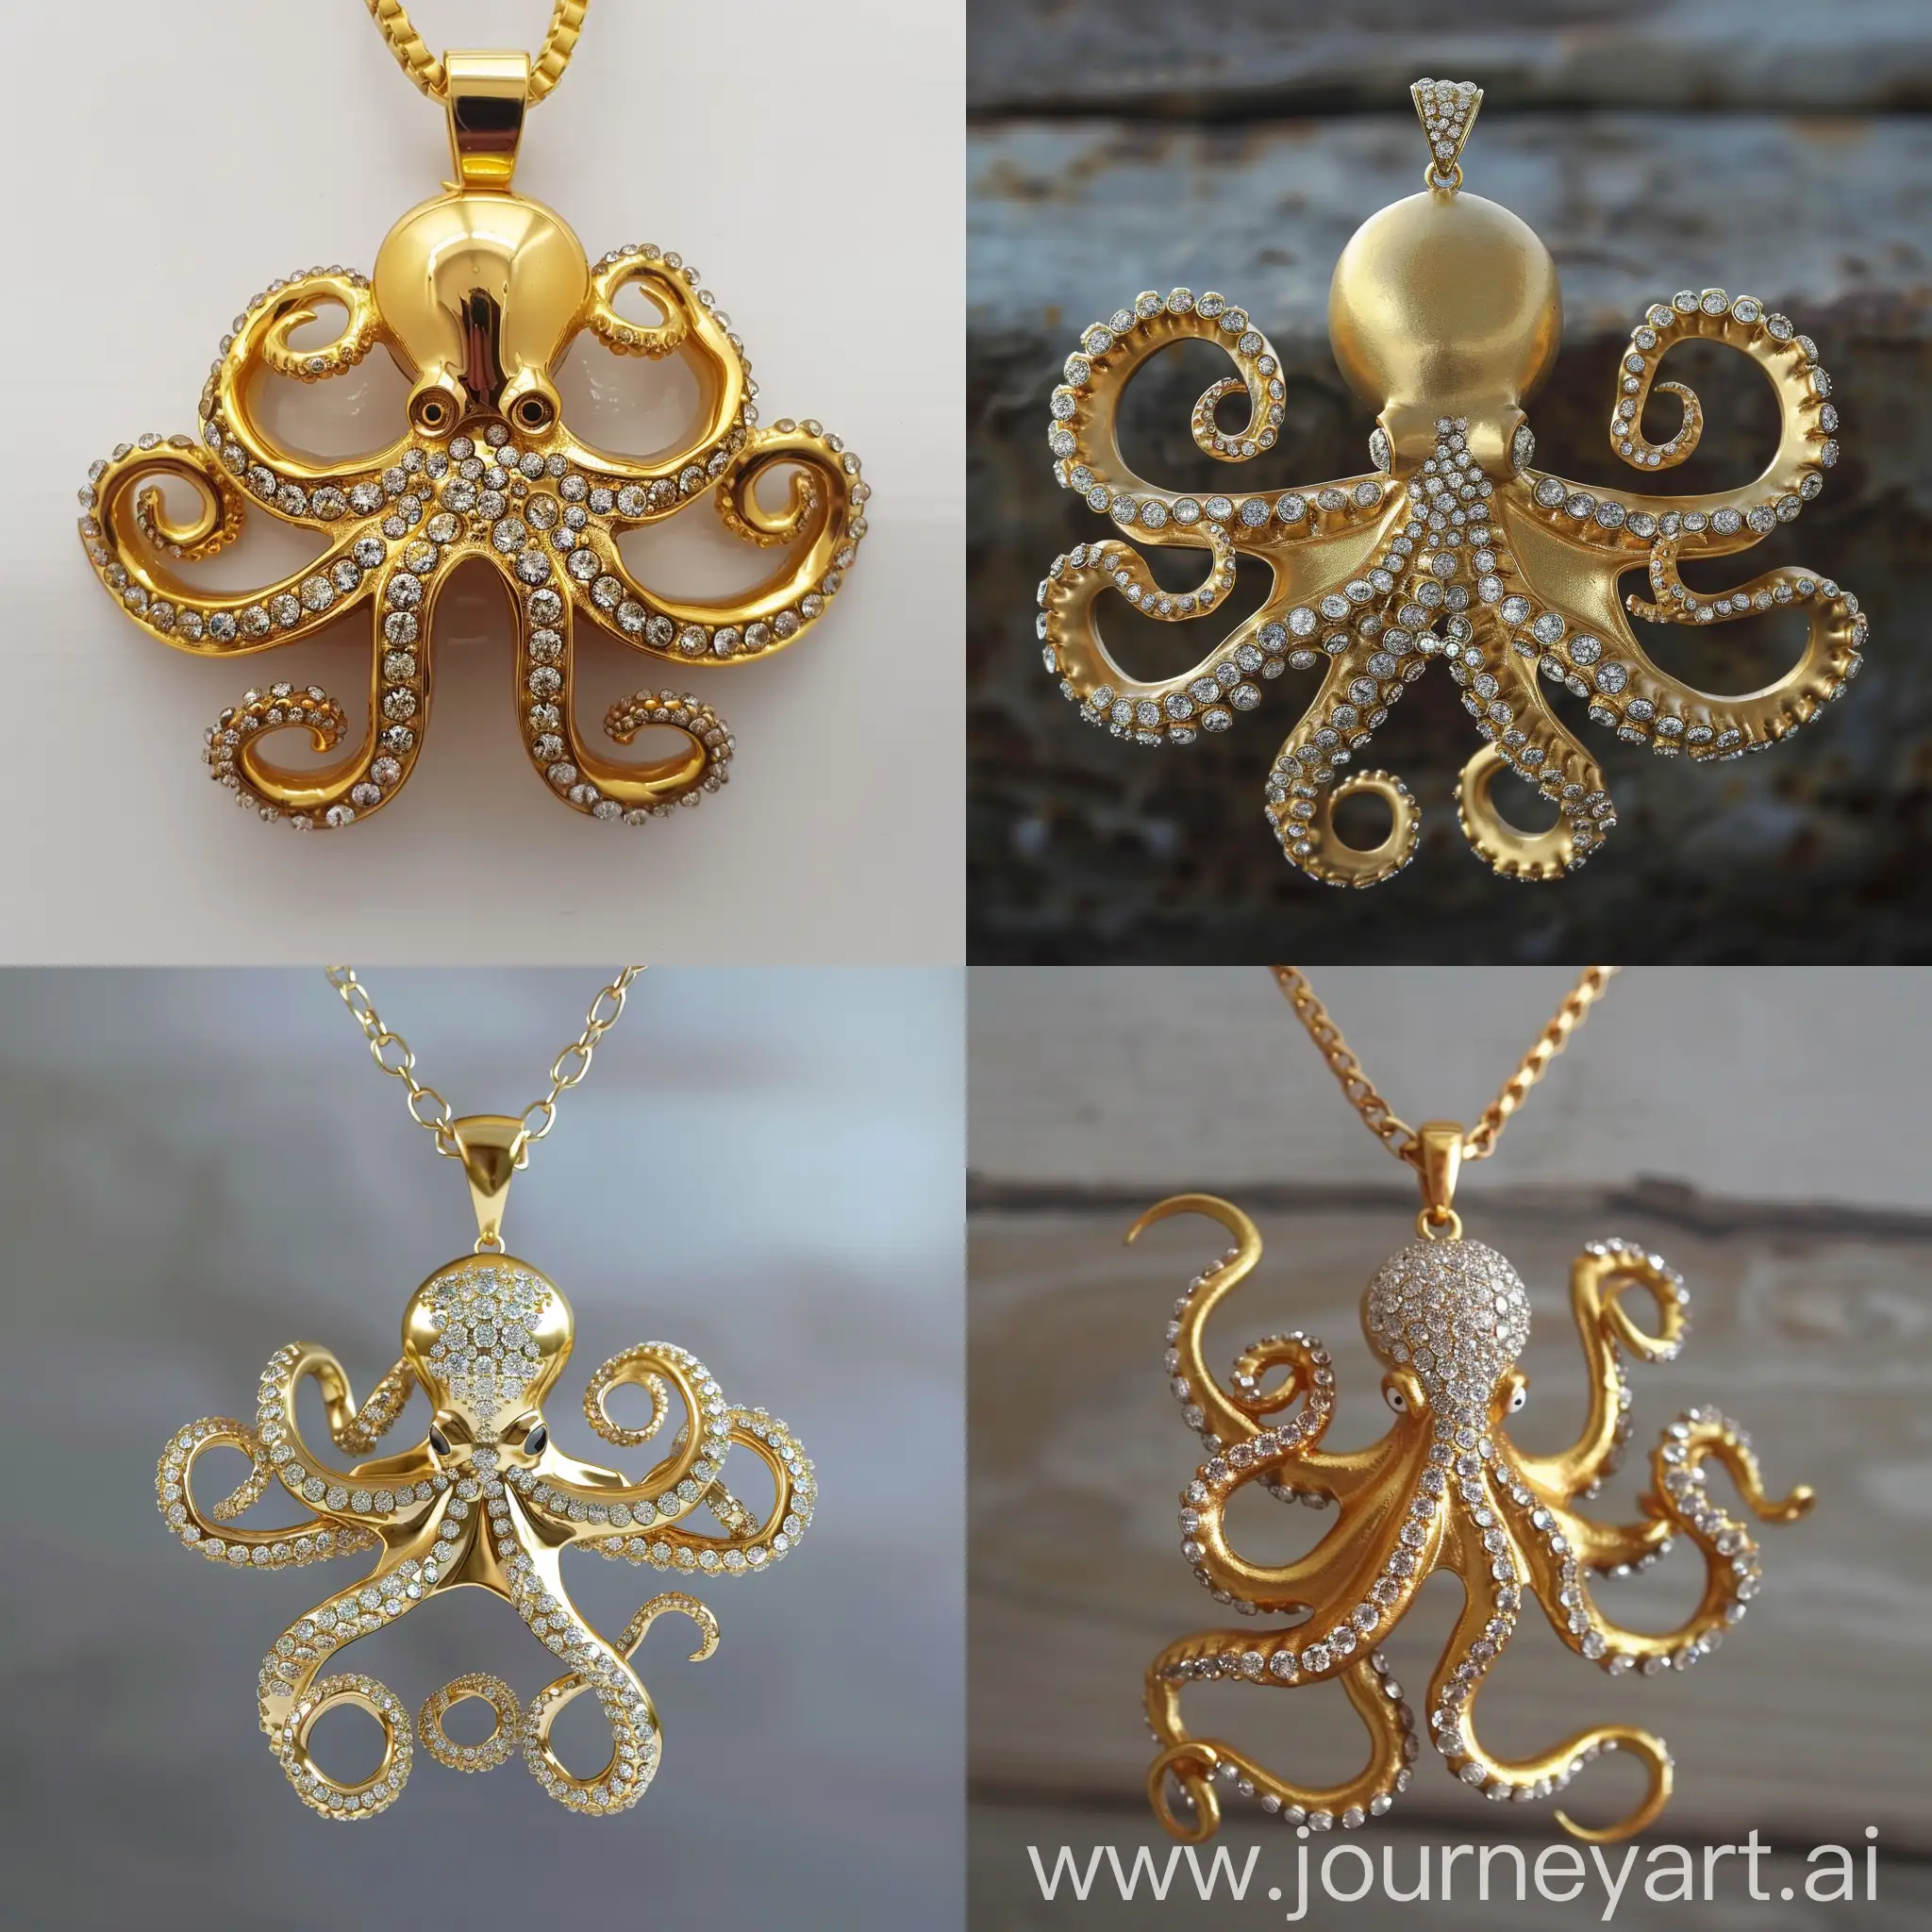 Imagine you are matrix software and create a gold pendant octopus with jeweled arms 